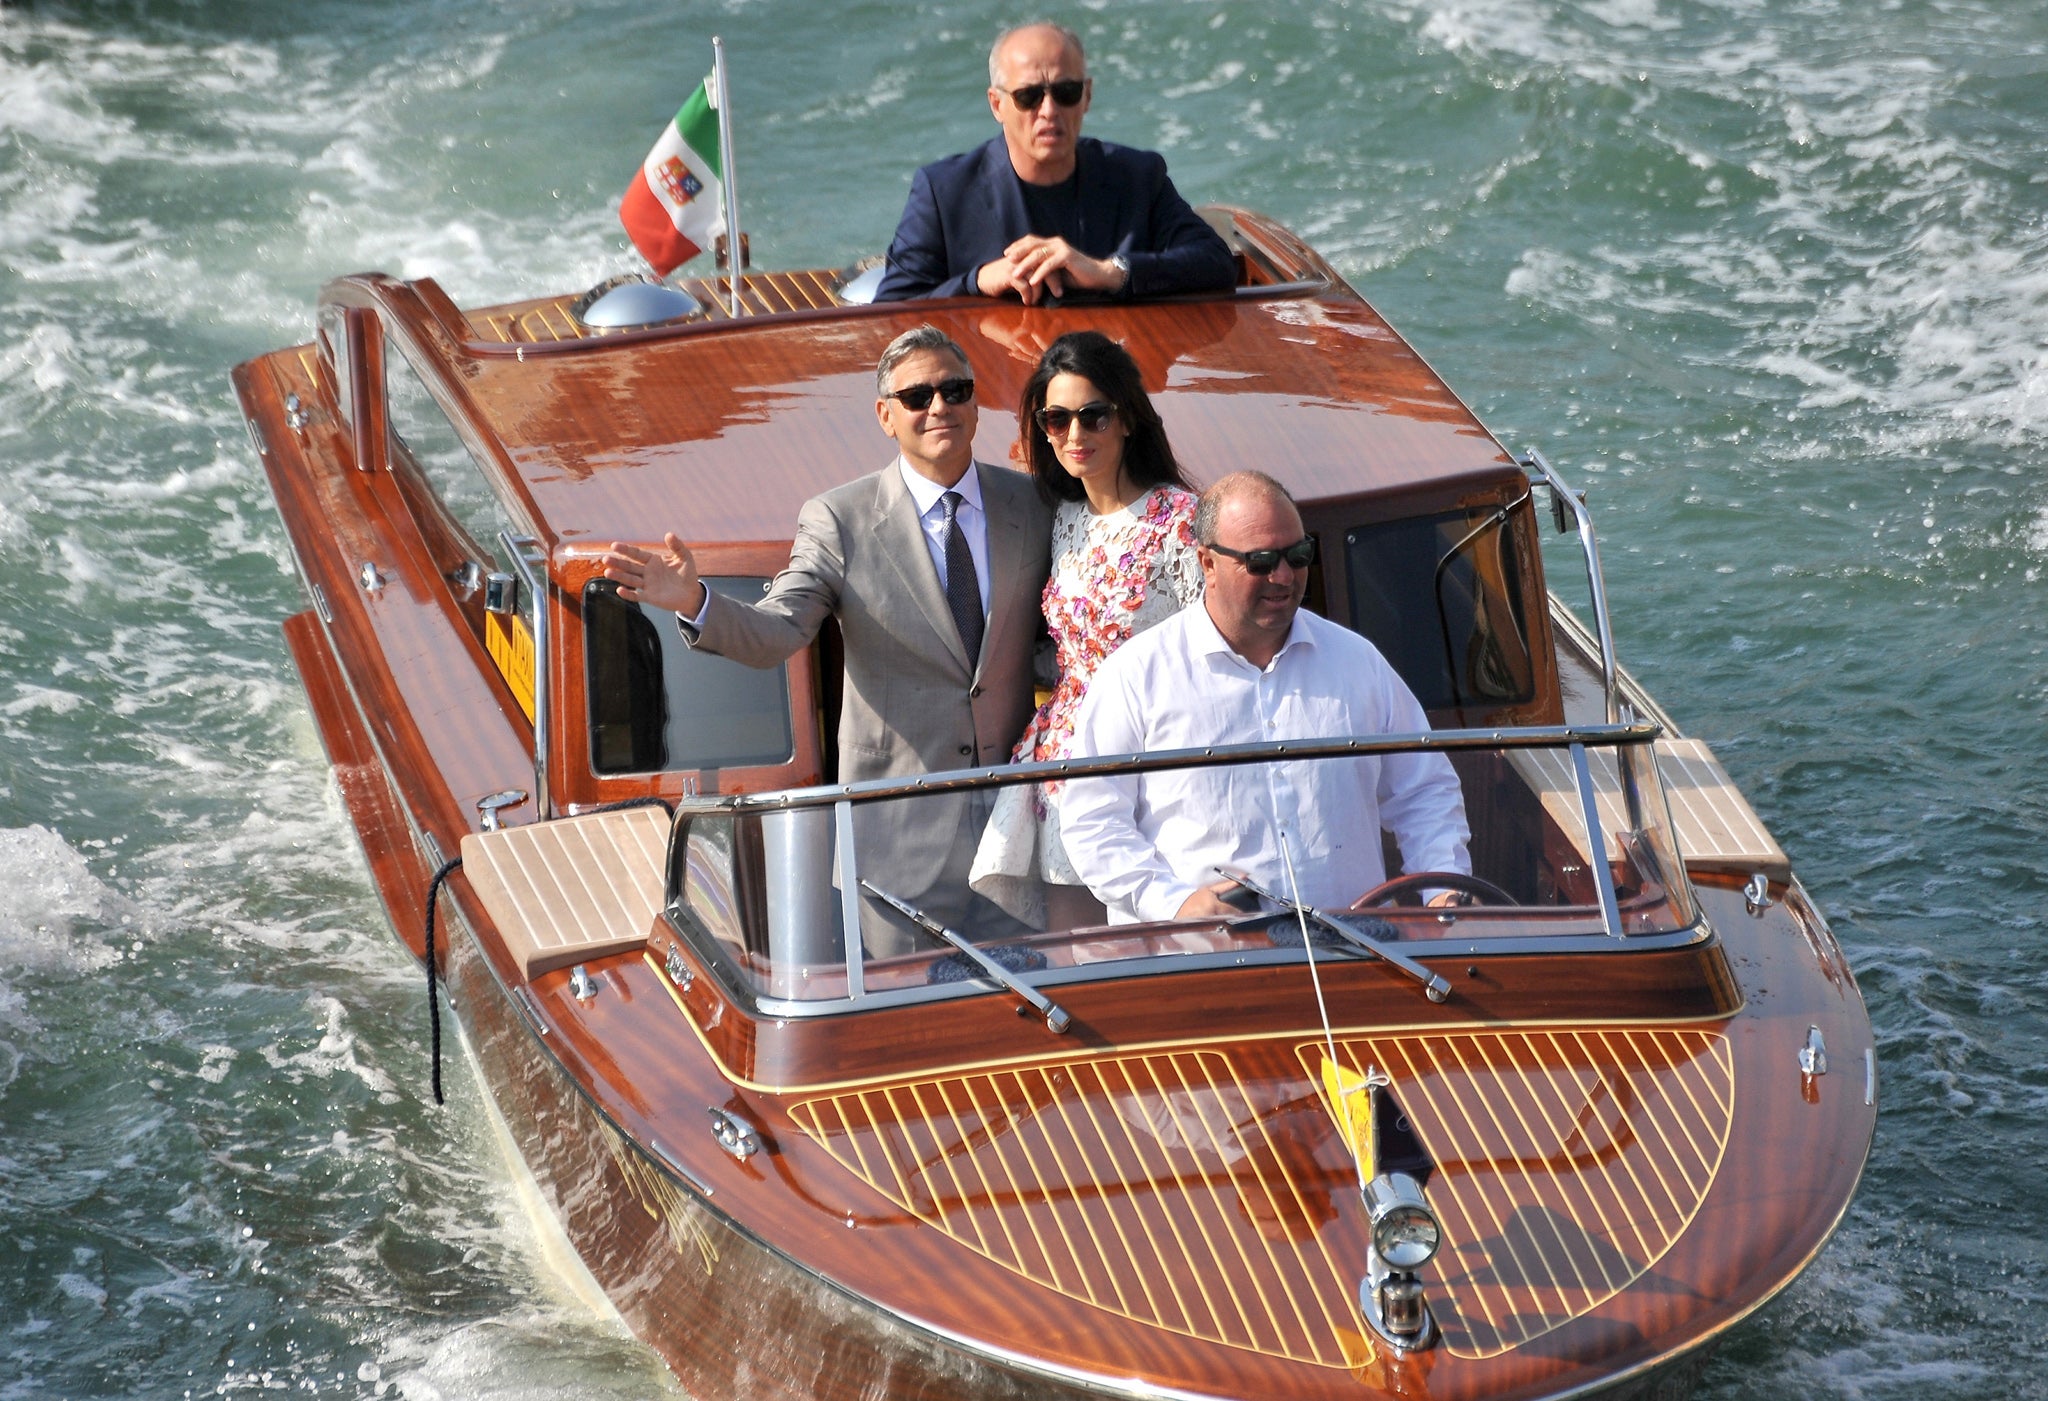 George Clooney and his wife Amal Alamuddin are surrounded by media and security boats as they tour the Grand Canal after leaving their hotel